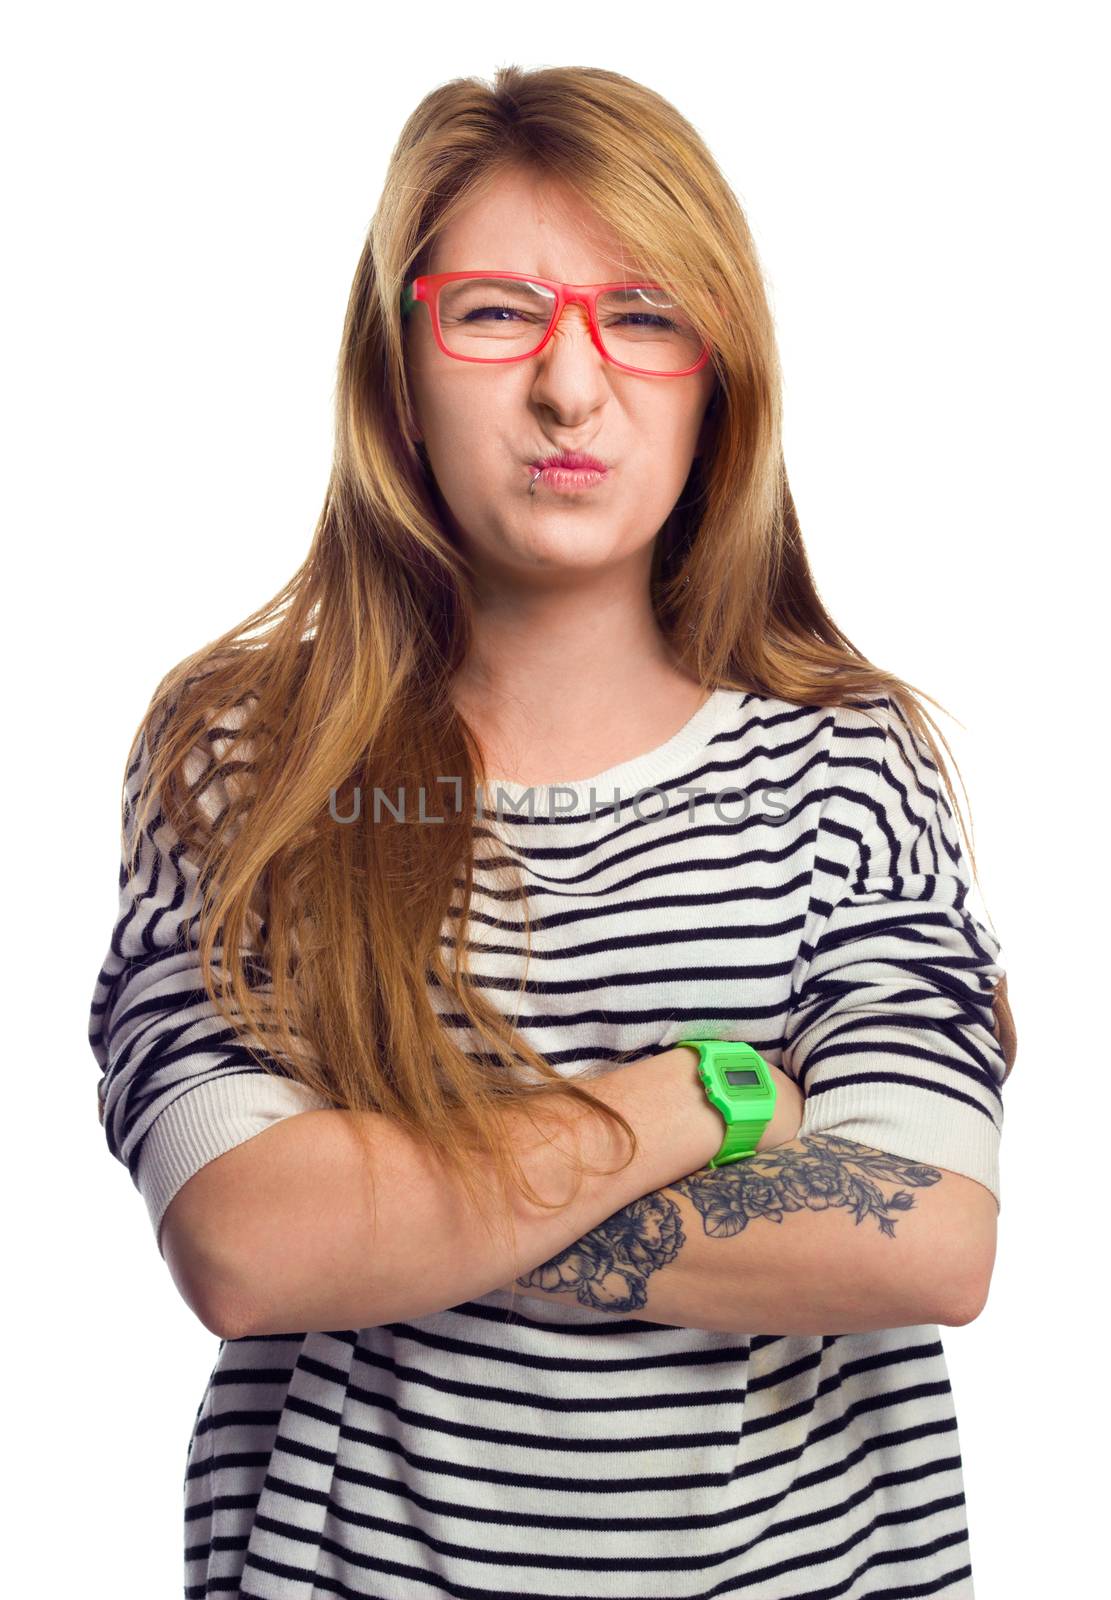 Angry strict woman wears glasses, grimace portrait on white background
